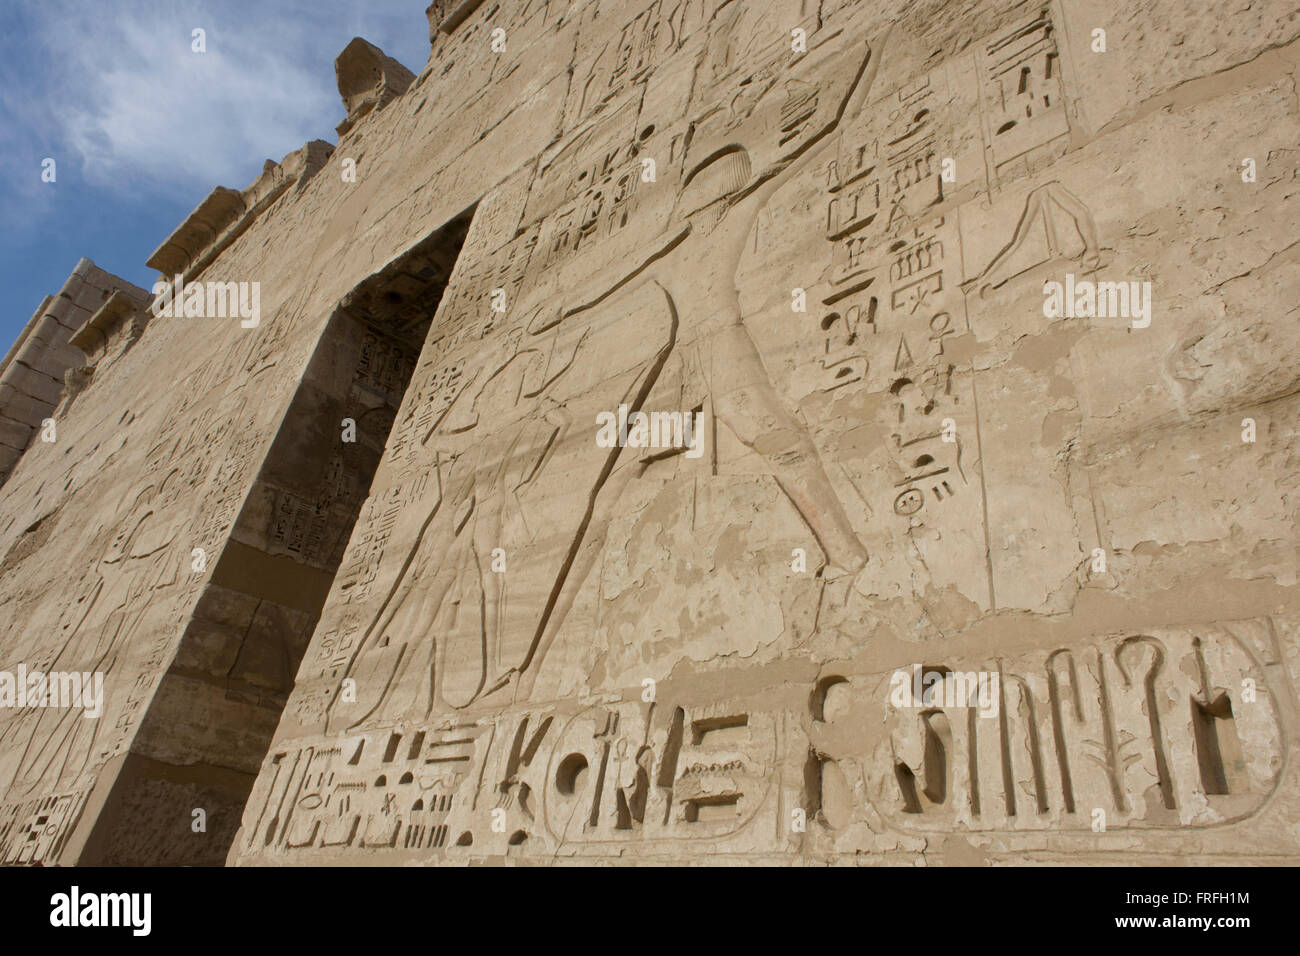 Hieroglyphs on the first pylon at the ancient Egyptian site of Medinet Habu (1194-1163BC), the Mortuary Temple of Ramesses III in Luxor, Nile Valley, Egypt. Medinet Habu is an important New Kingdom period structure in the West Bank of Luxor in Egypt. Aside from its size and architectural and artistic importance, the temple is probably best known as the source of inscribed reliefs depicting the advent and defeat of the Sea Peoples during the reign of Ramesses III. Stock Photo